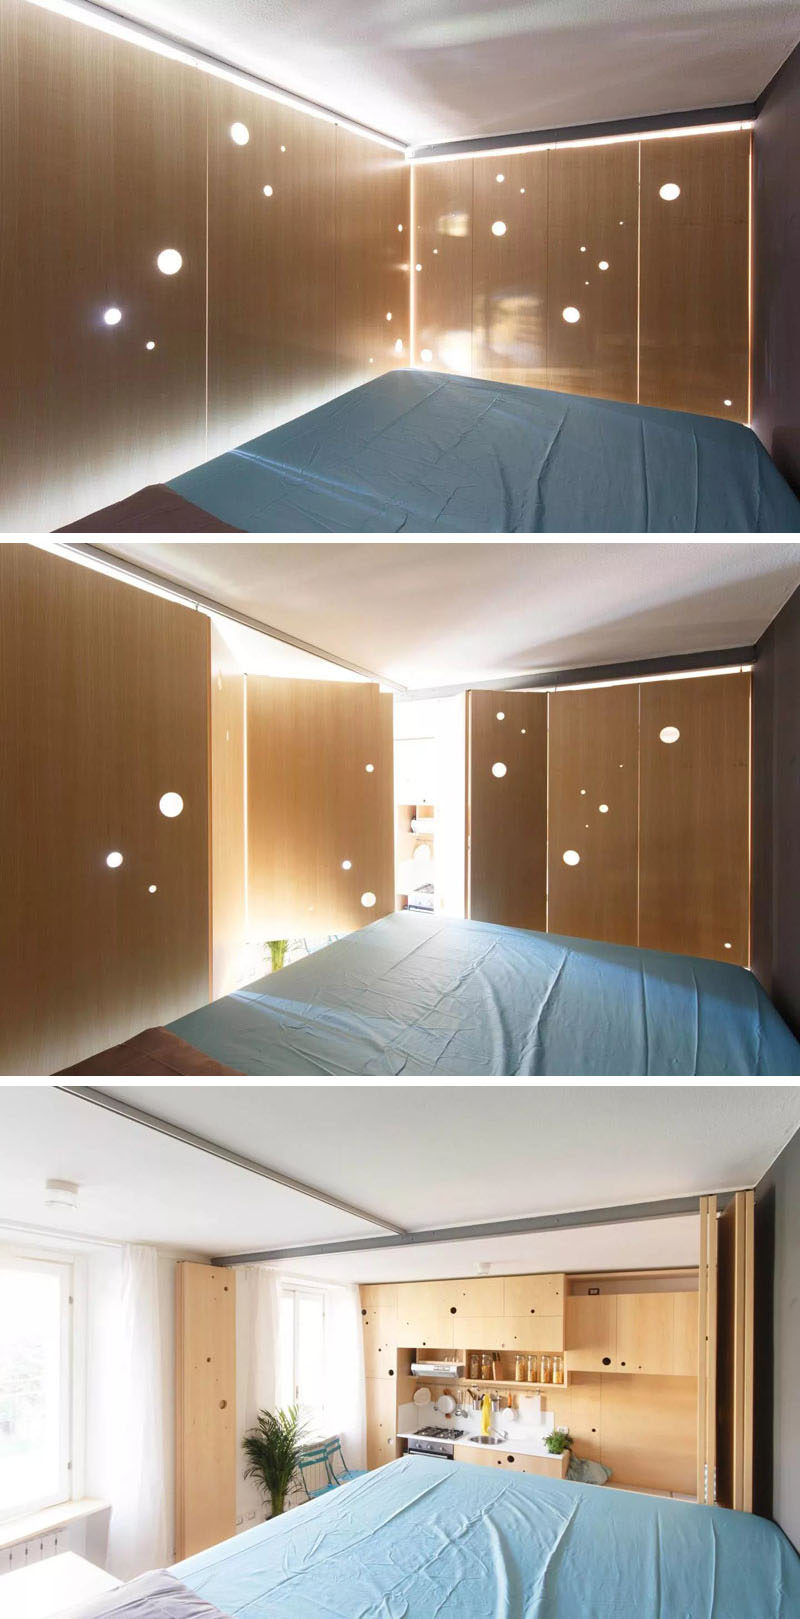 This tiny apartment can close off the bedroom when needed.